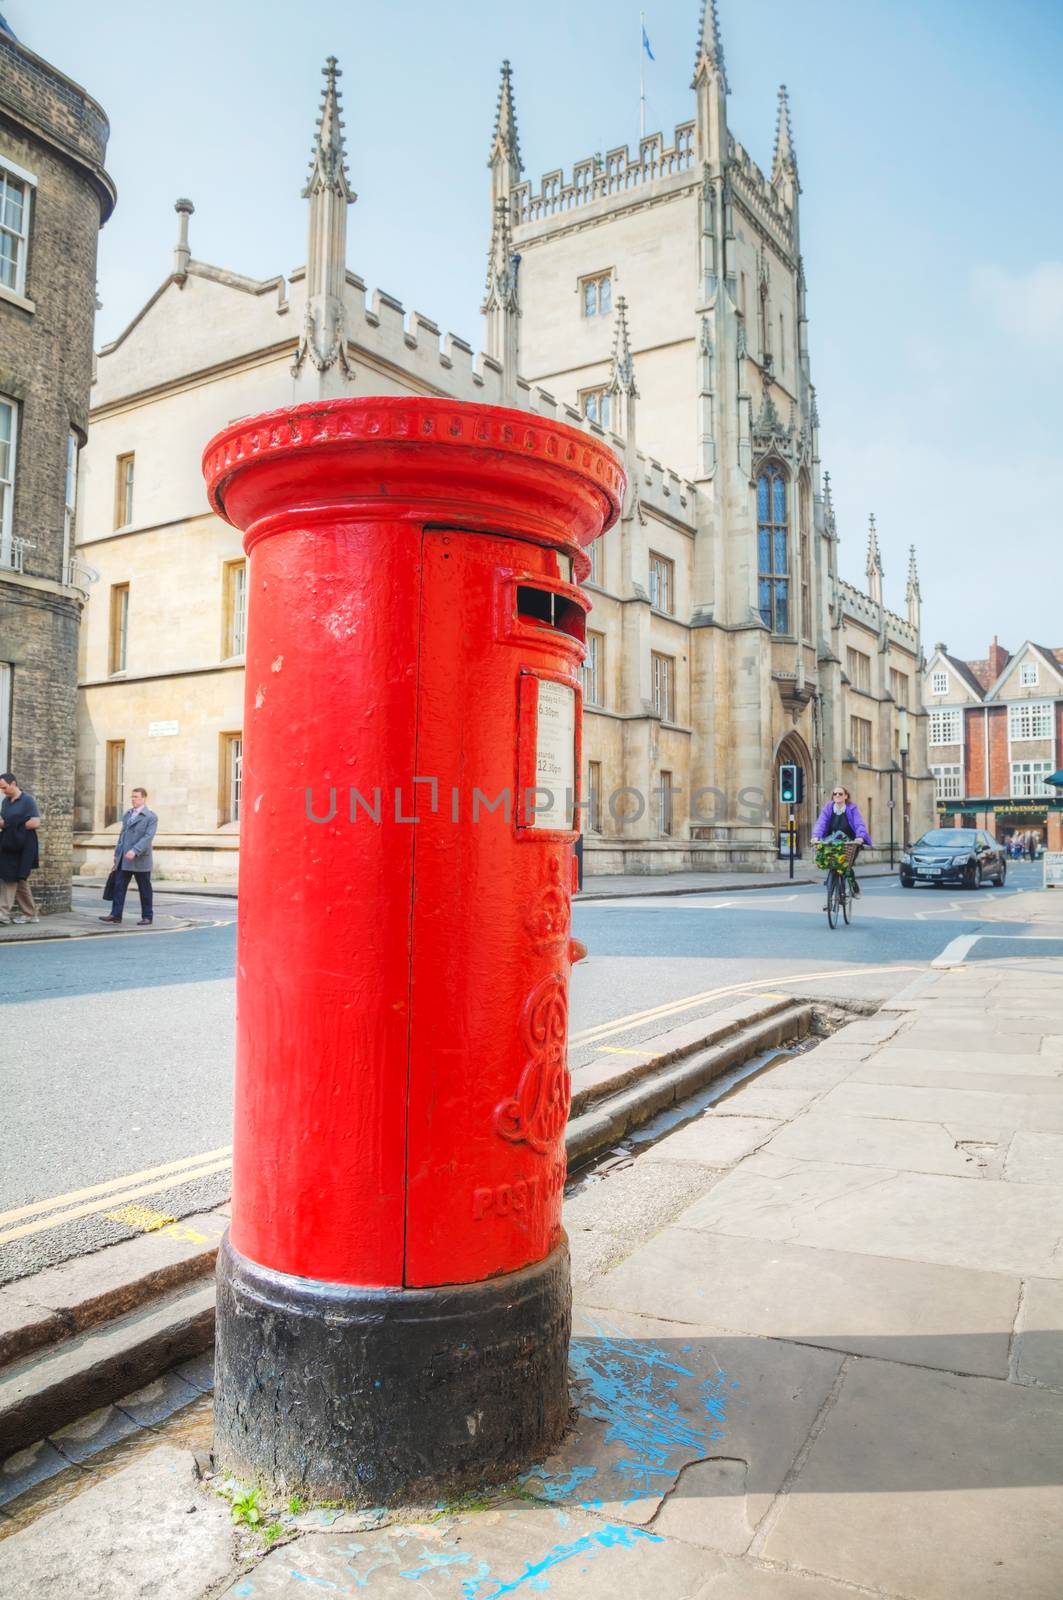 Famous red post box on a street in Cambridge, UK by AndreyKr